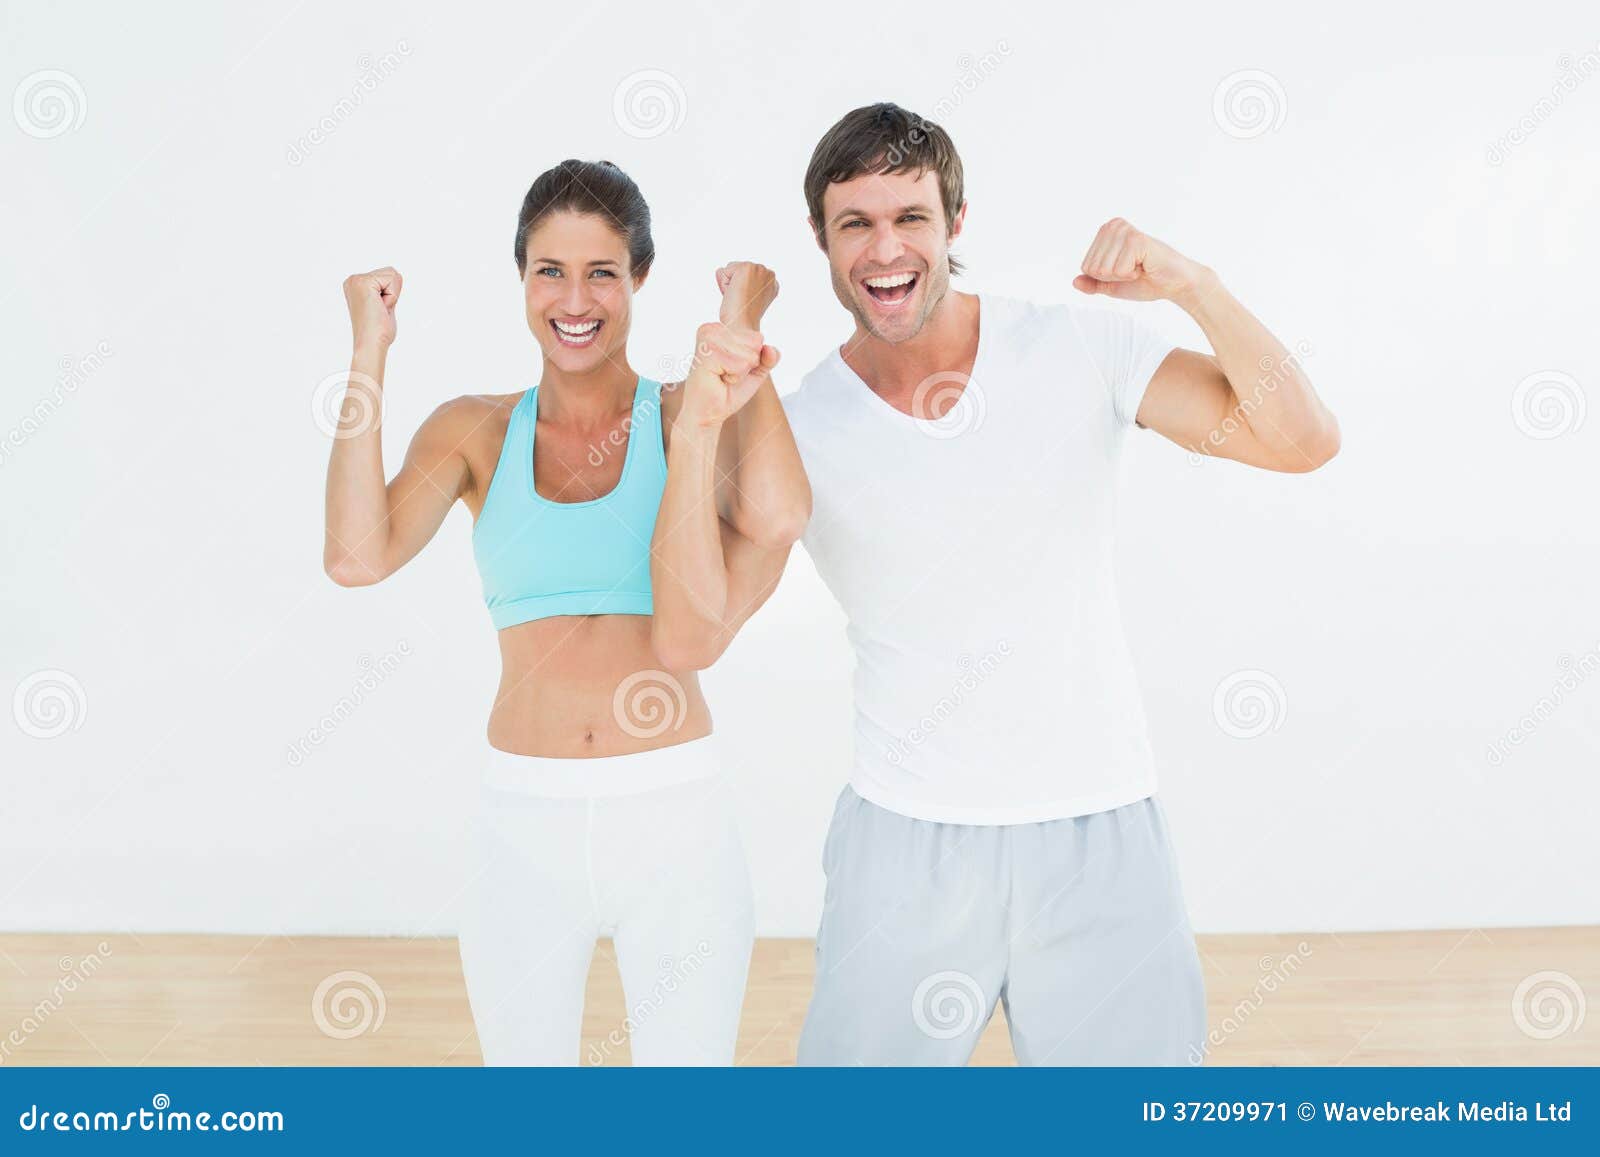 cheerful fit couple clenching fists in fitness studio